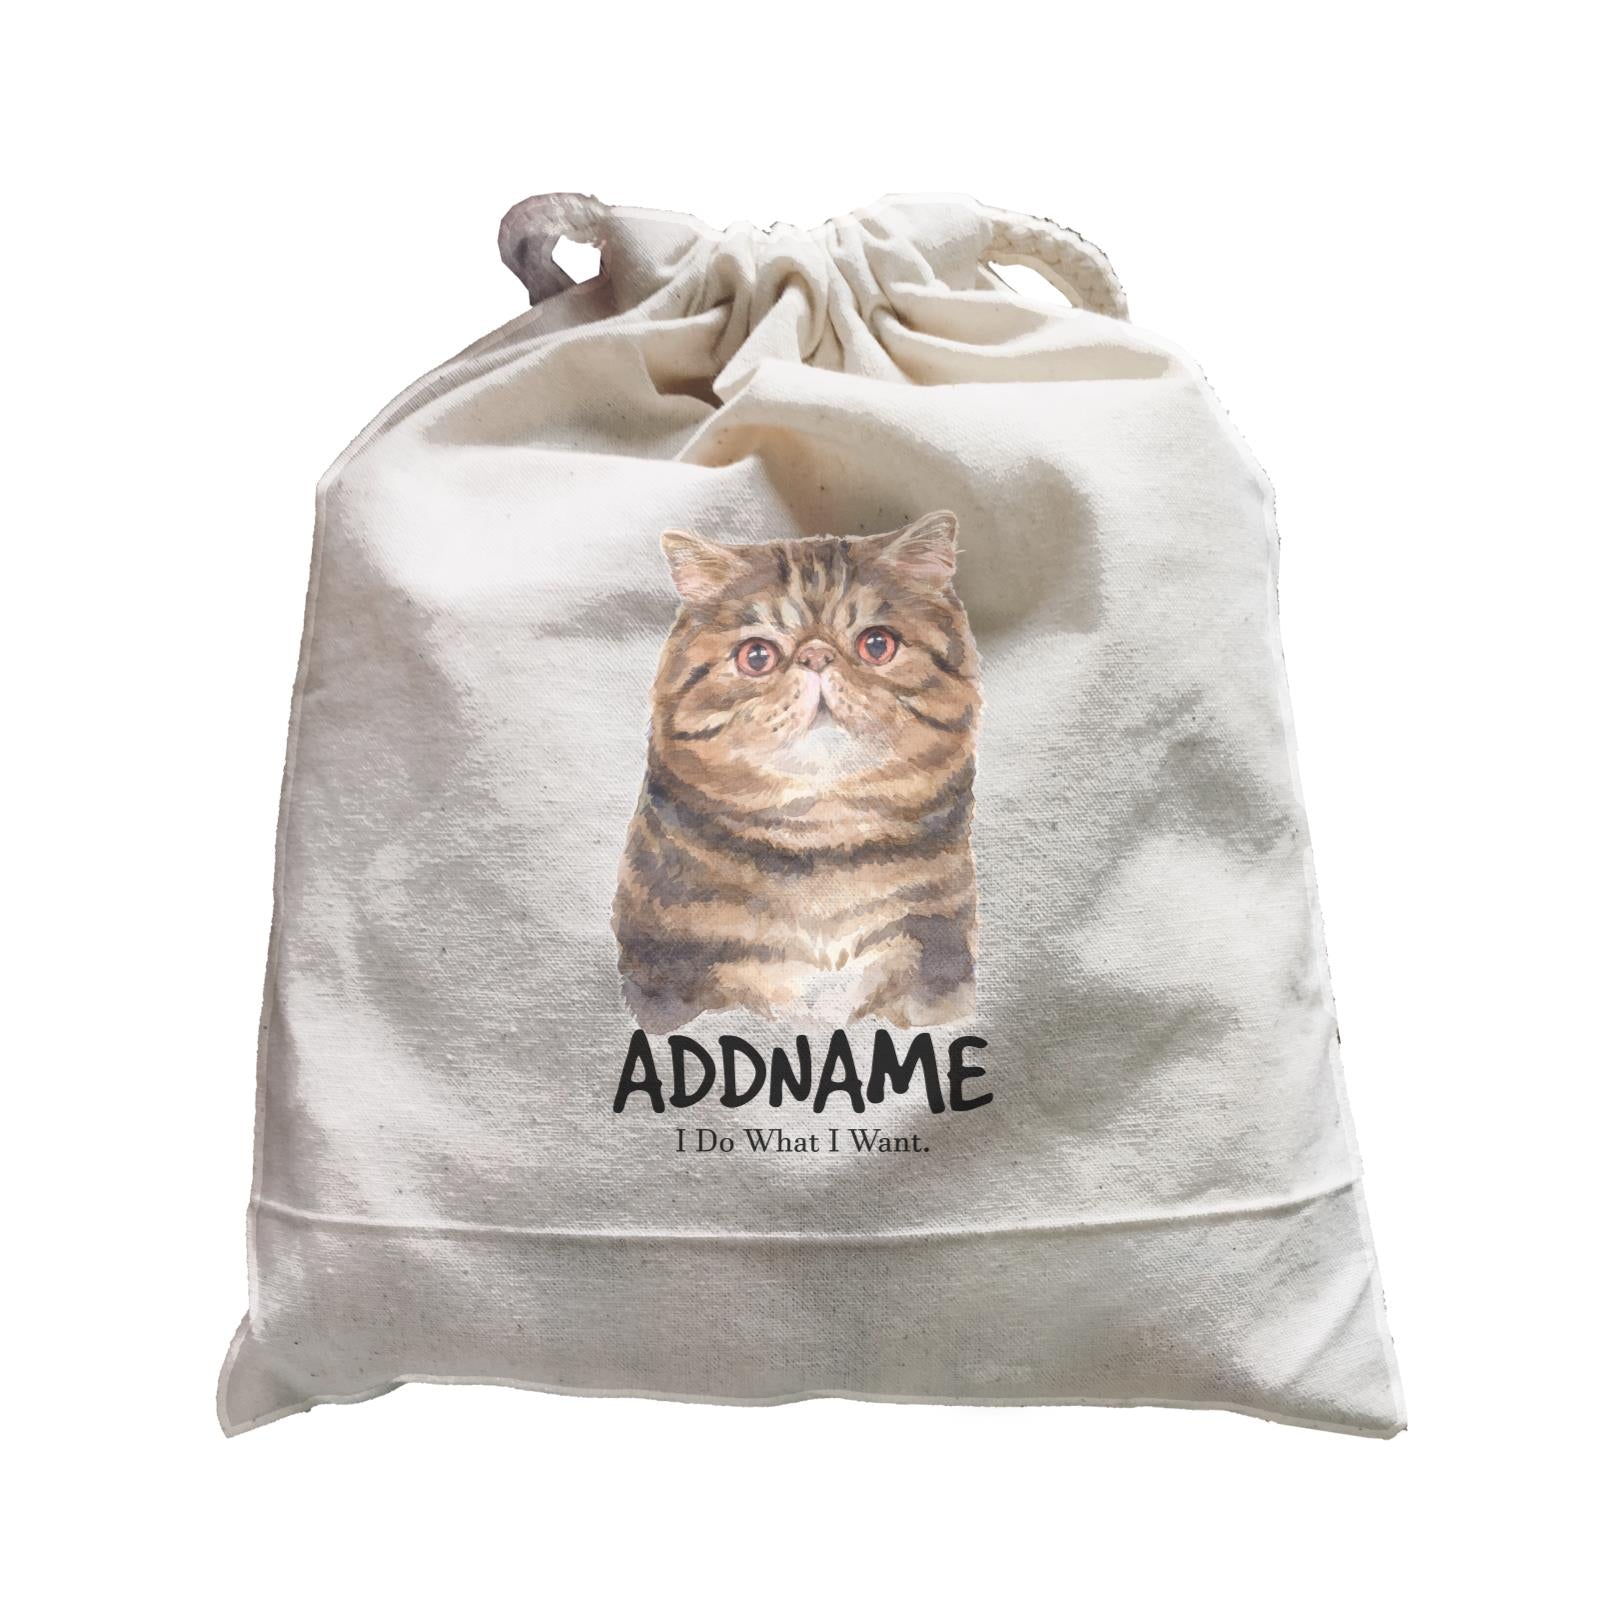 Watercolor Cat Exotic Shorthair I Do What I Want Addname Satchel